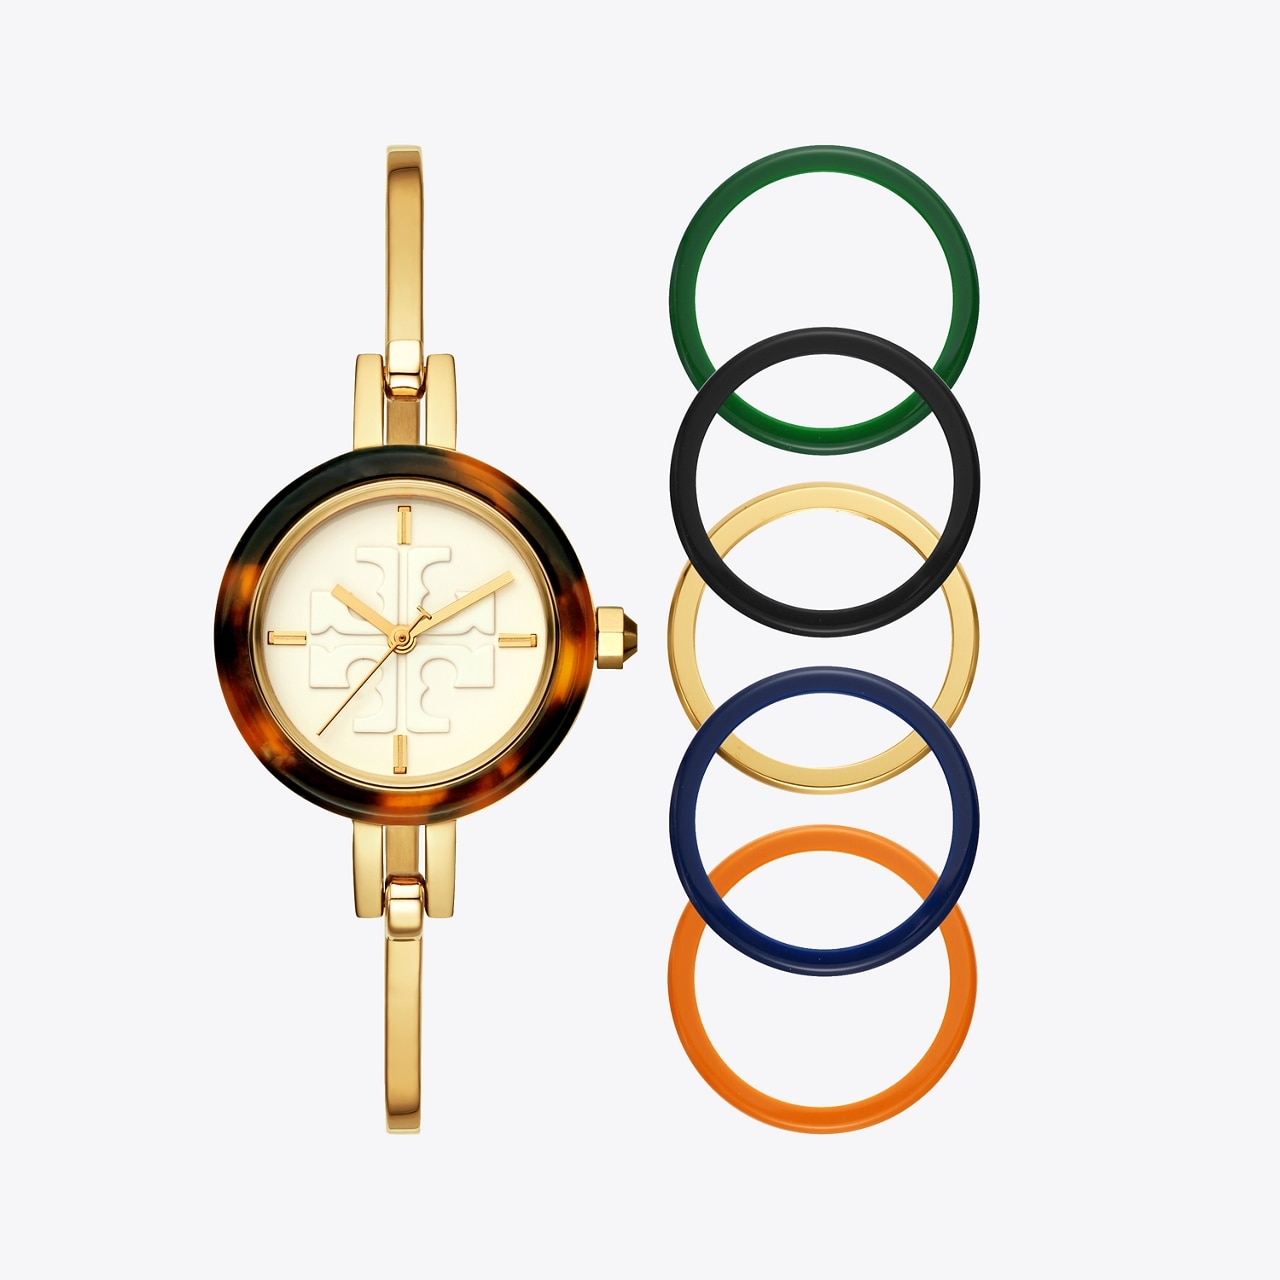 Tory Burch Watches For Women